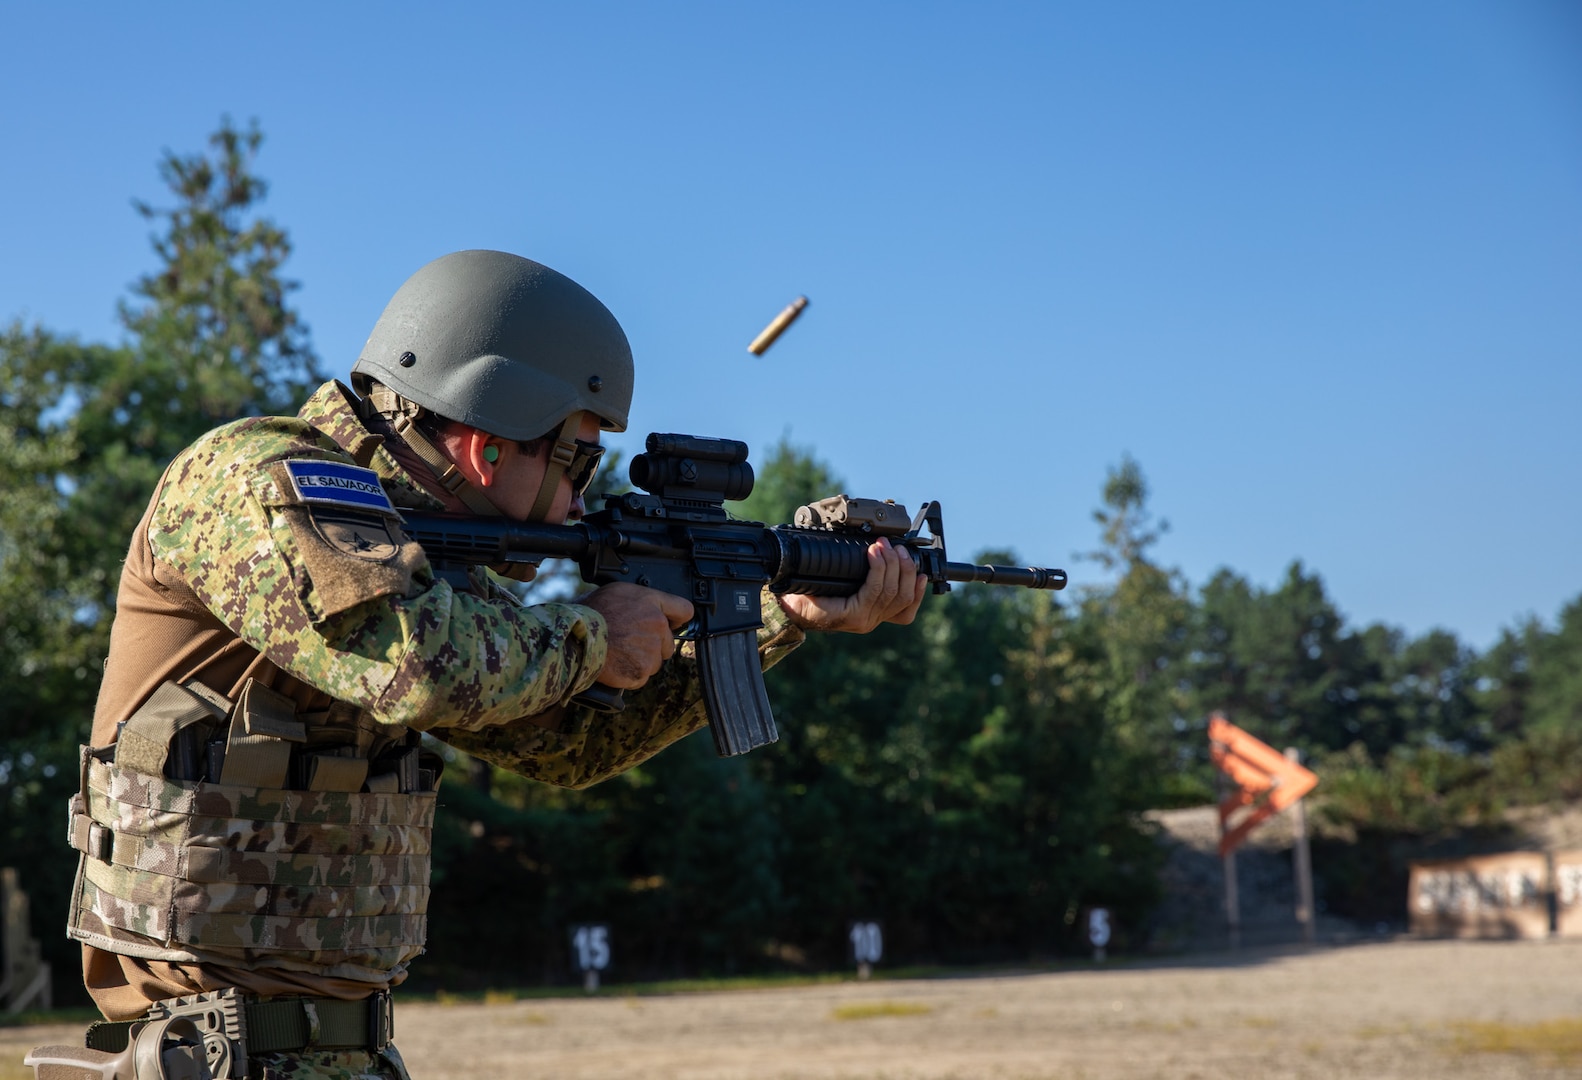 Subteniente Jaime Peraza of the Salvadoran infantry shoots an M4 rifle from the standing position during the 2023 New Hampshire National Combat Marksmanship Match on Sept. 7, 2023, at Fort Devens, Mass.